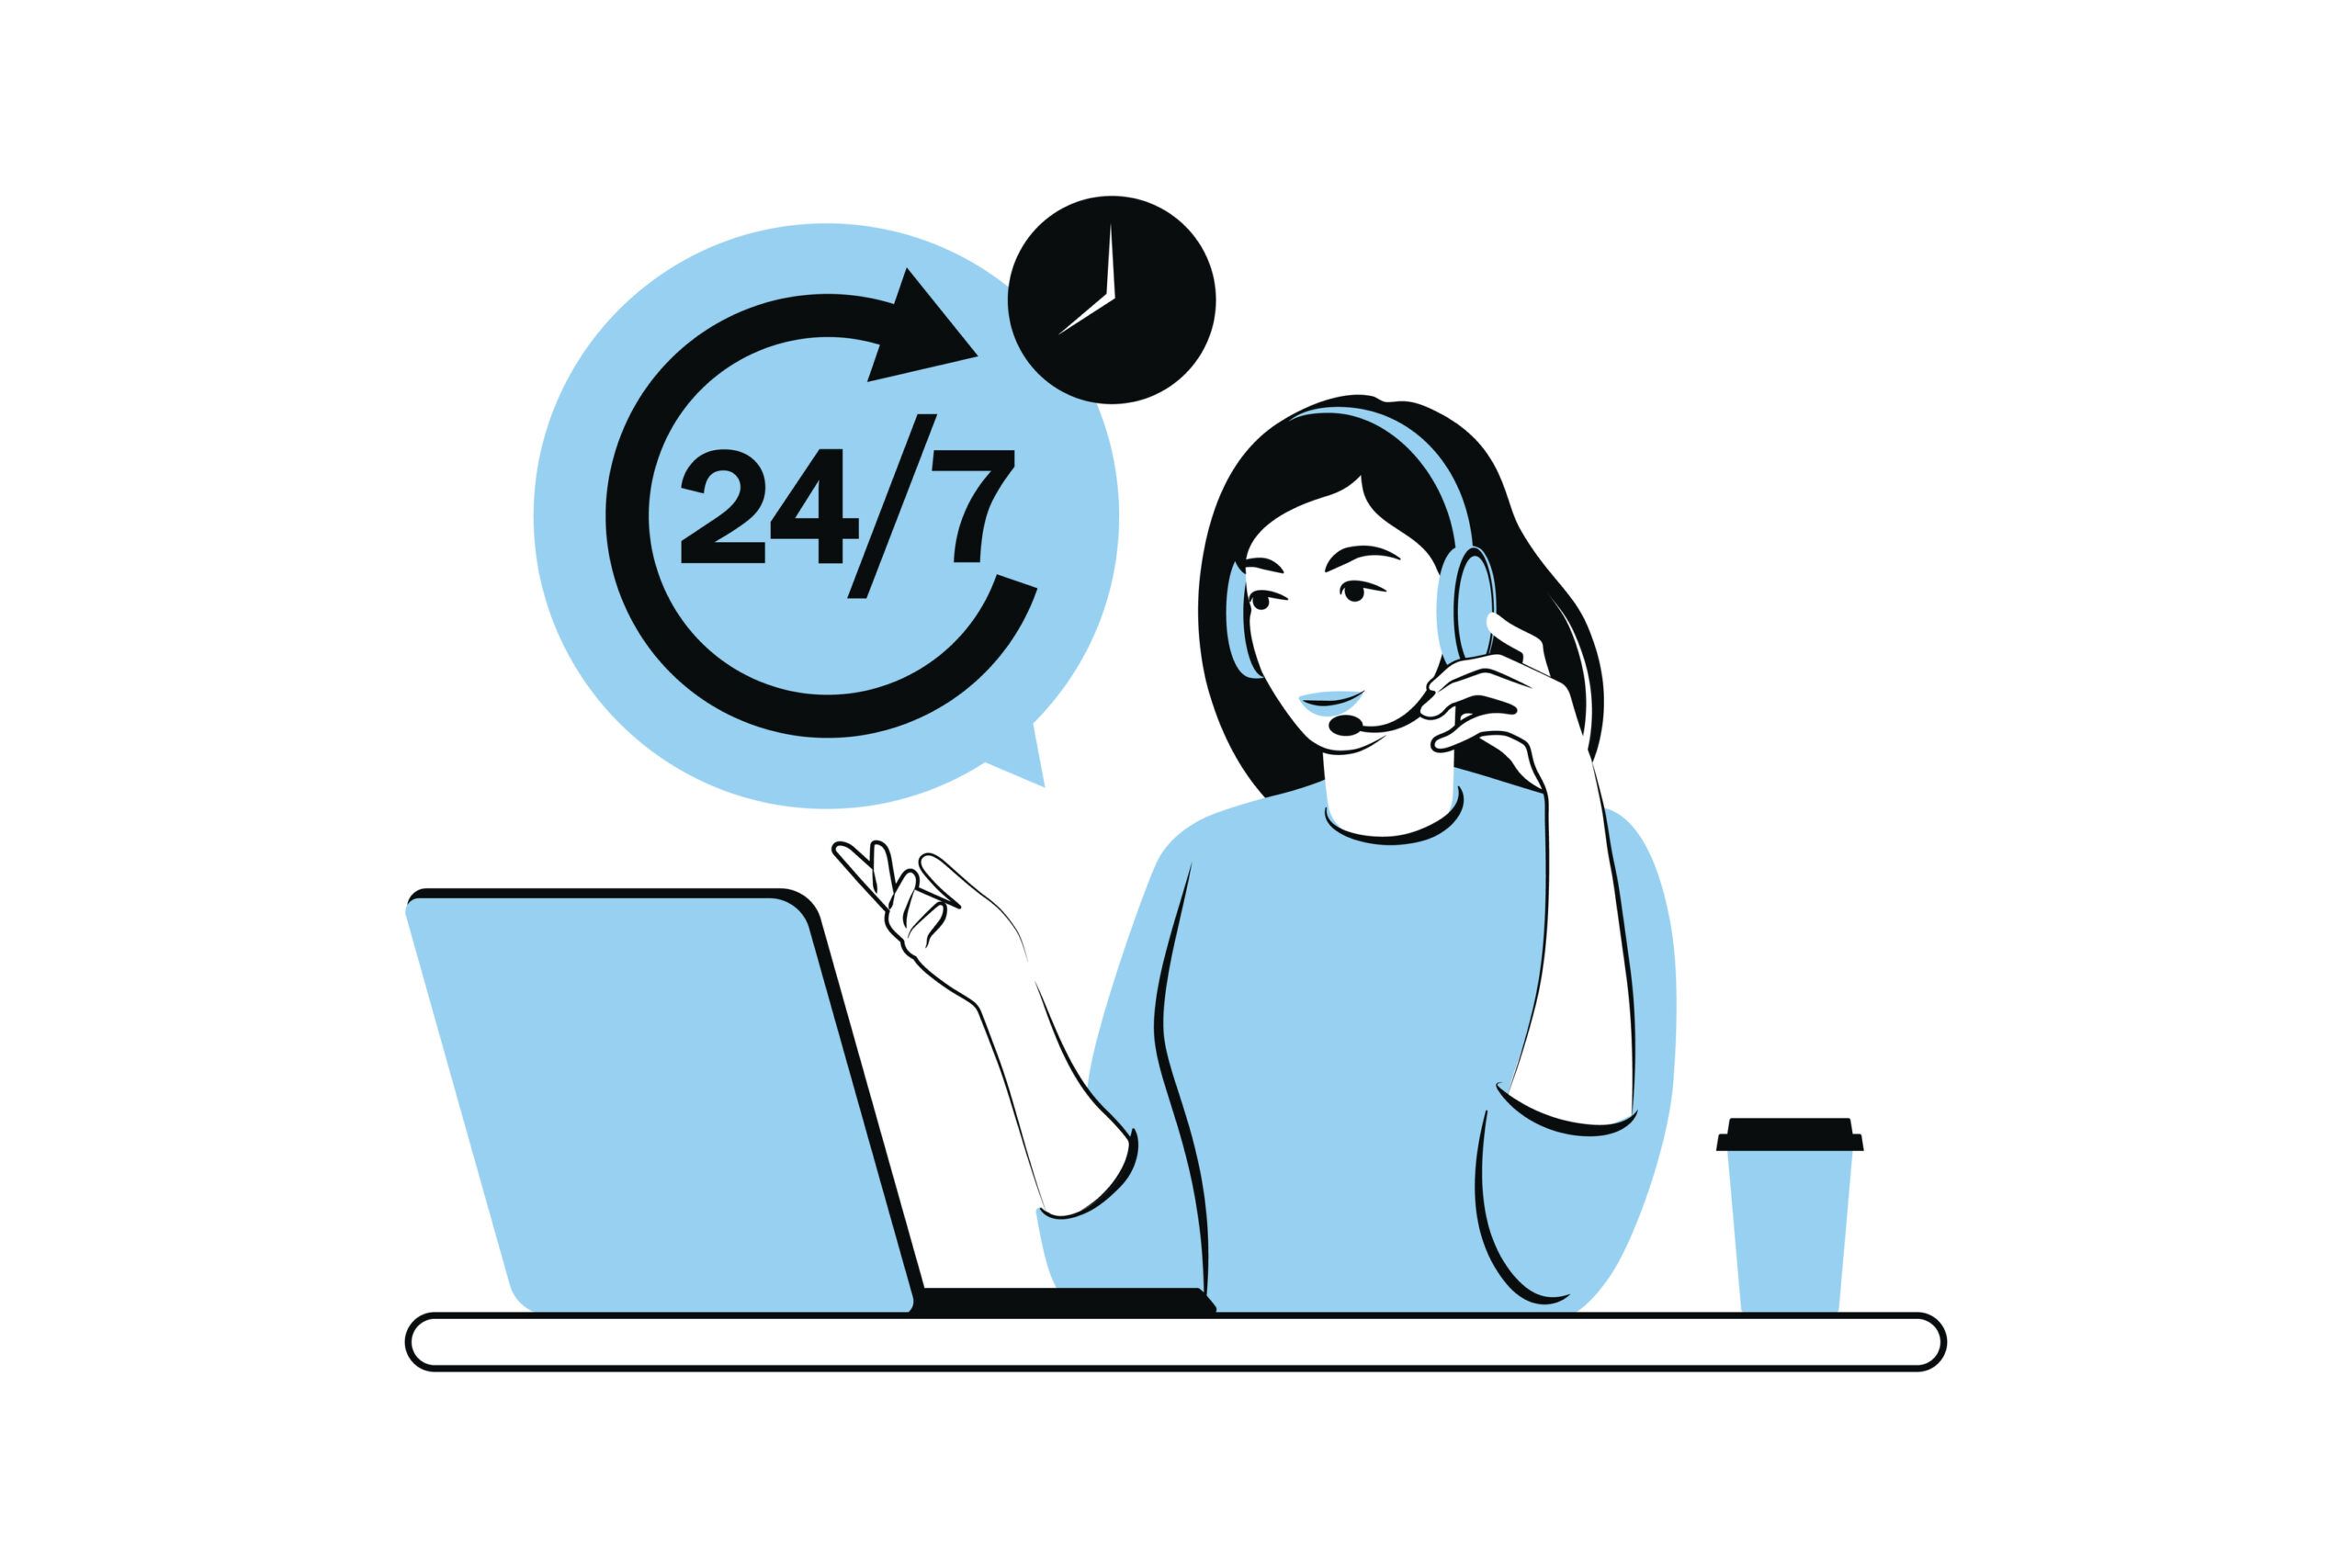 service-24-7-concept-call-center-support